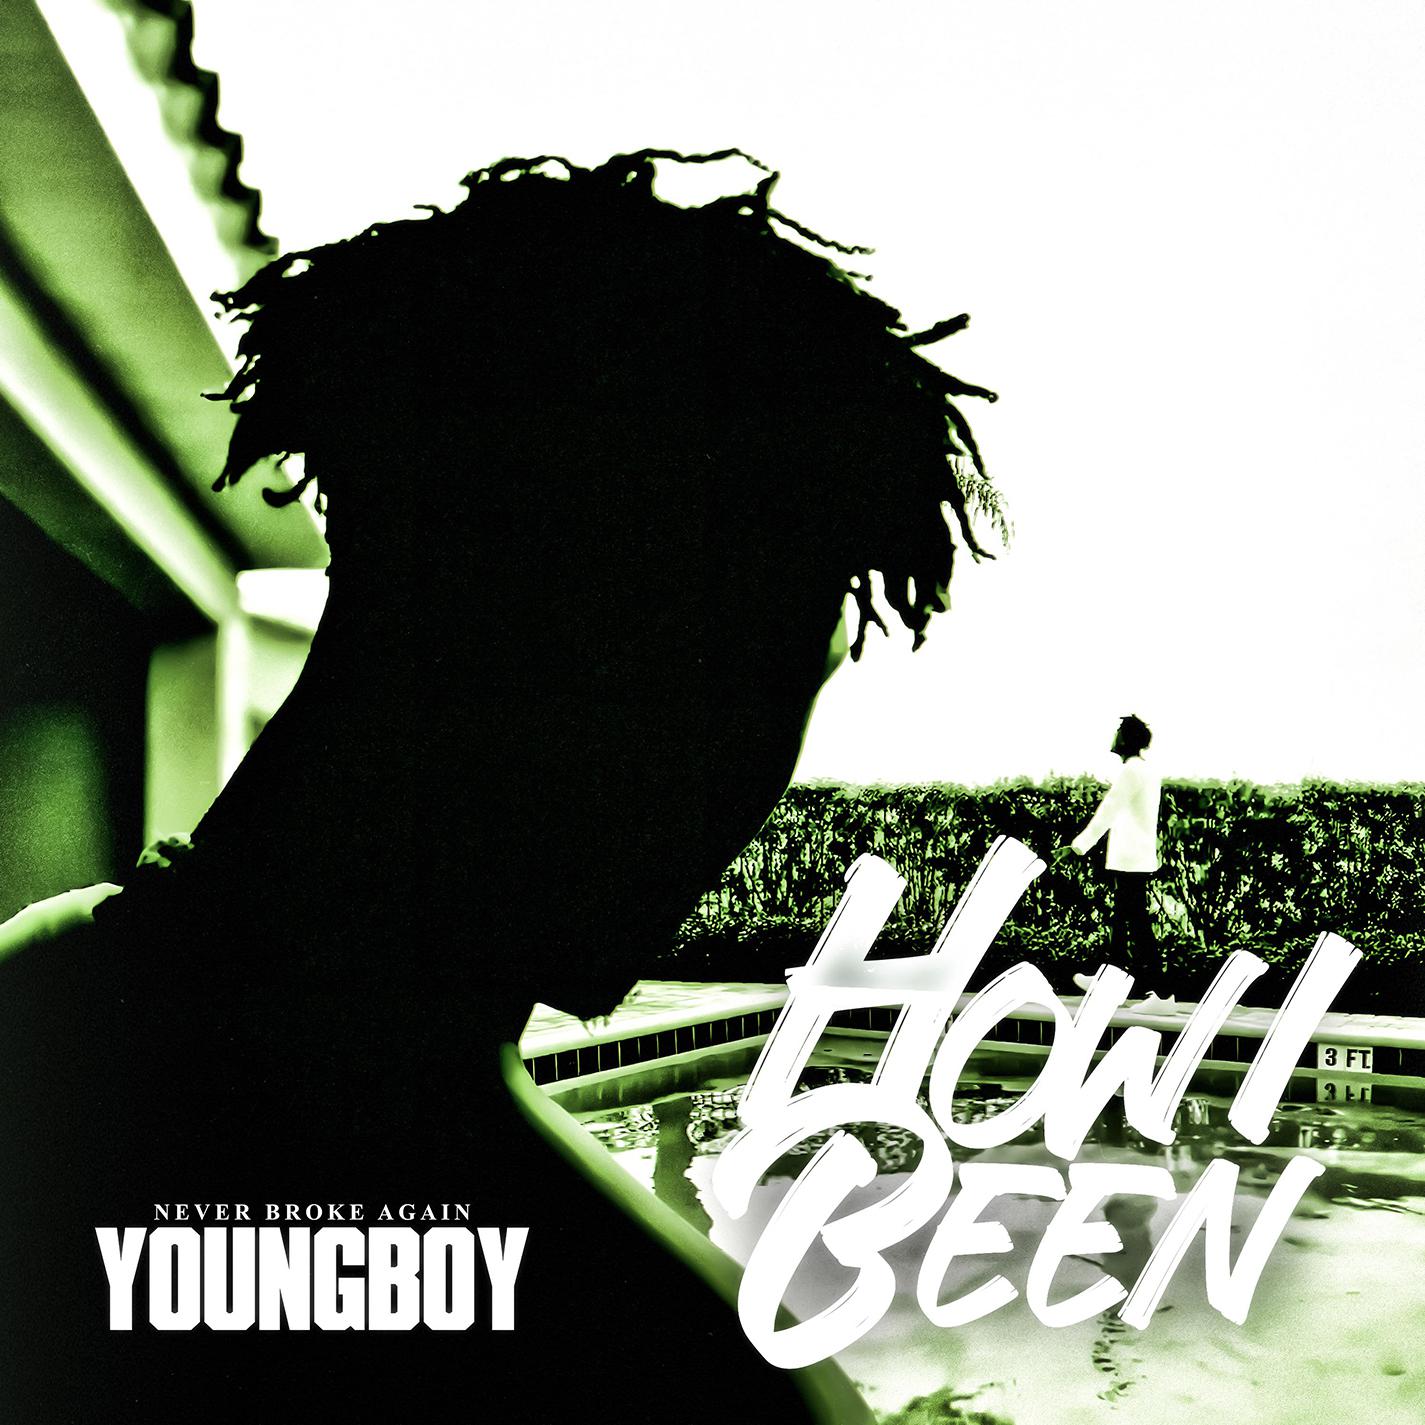 How I Been歌词 歌手Youngboy Never Broke Again-专辑How I Been-单曲《How I Been》LRC歌词下载